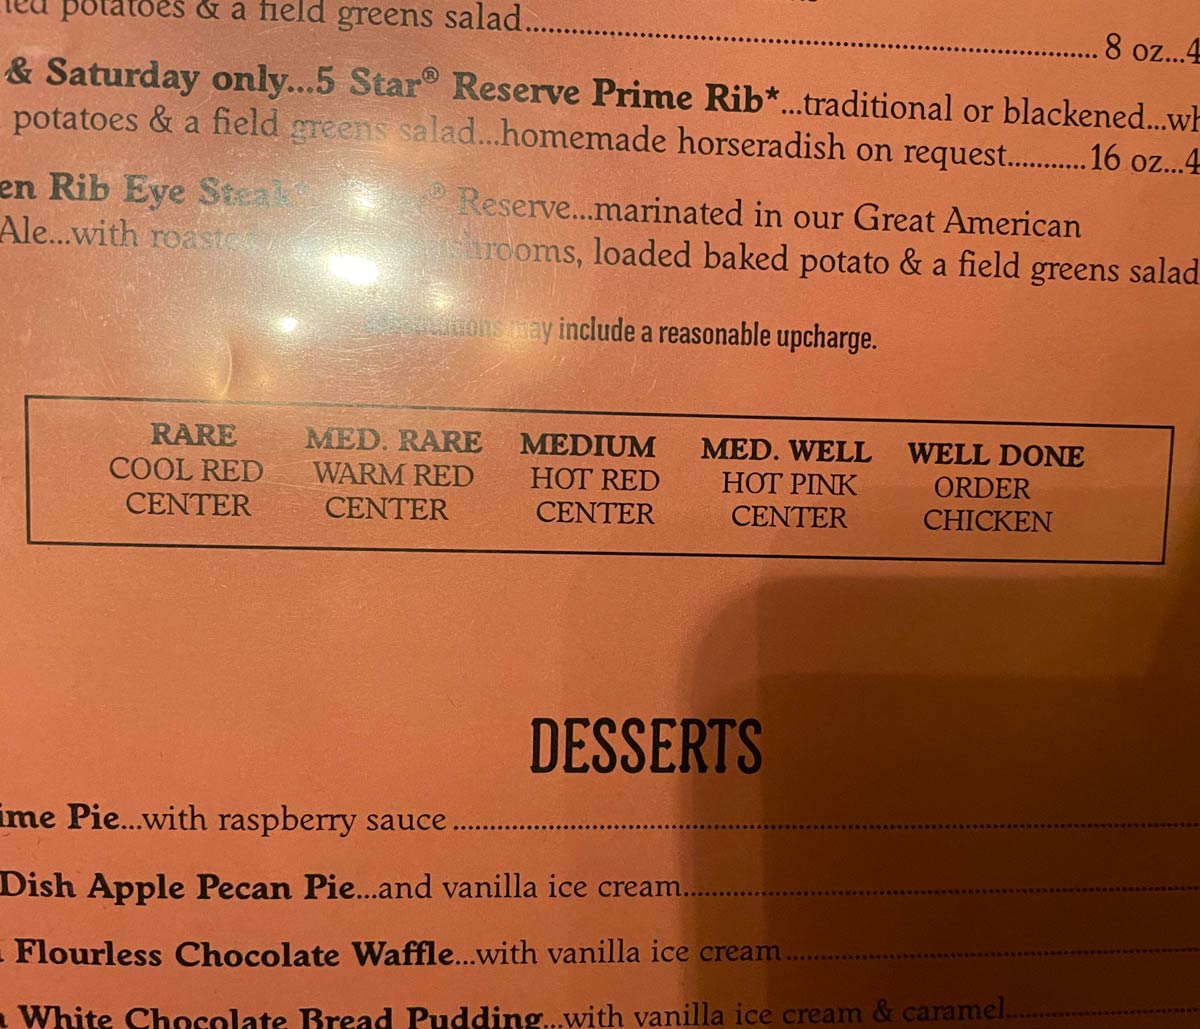 This steak guide at the steakhouse I went to